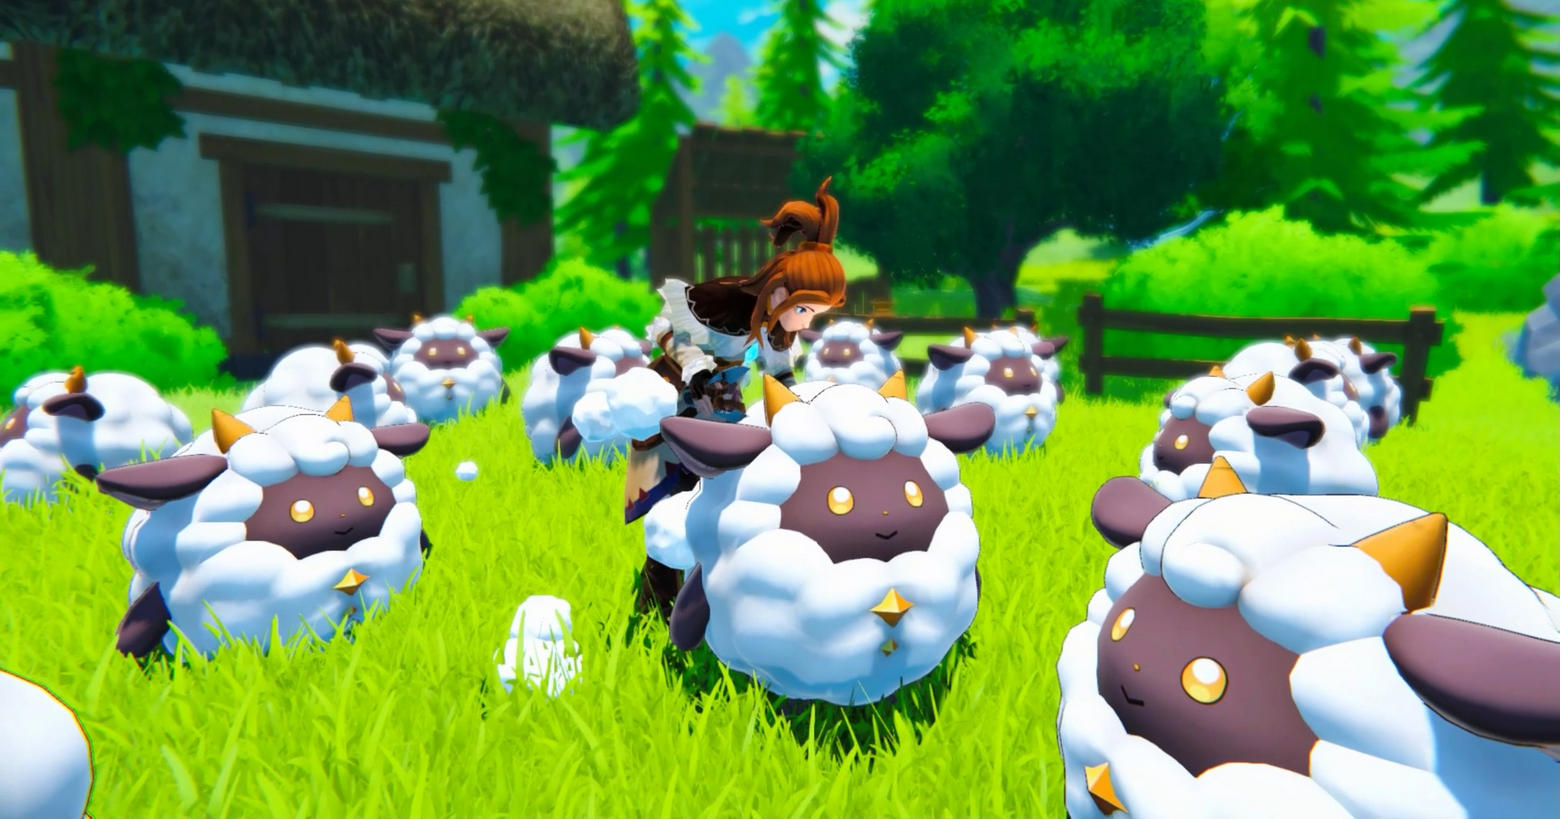 In this screenshot from Palworld, we are standing on a lush green grassy field in broad daylight. Numerous spherical very cute-looking sheep with yellow beady eyes and smiling faces are standing in the field around us. The field extends into the background of the image, becoming increasingly blurred. The focus is on a female character with a brown pigtail and brown and white clothing. The player is shown in a long shot in the center of the image. He is bending down to a sheep in order to gain wool. Around the field, we glimpse a forest landscape with lush green leaves as well. In the upper left of the image in the background, a half-timbered house with a brown roof and white exterior is shown in the blur. A release date has yet to be announced, but a trailer already shows a lot of gameplay.